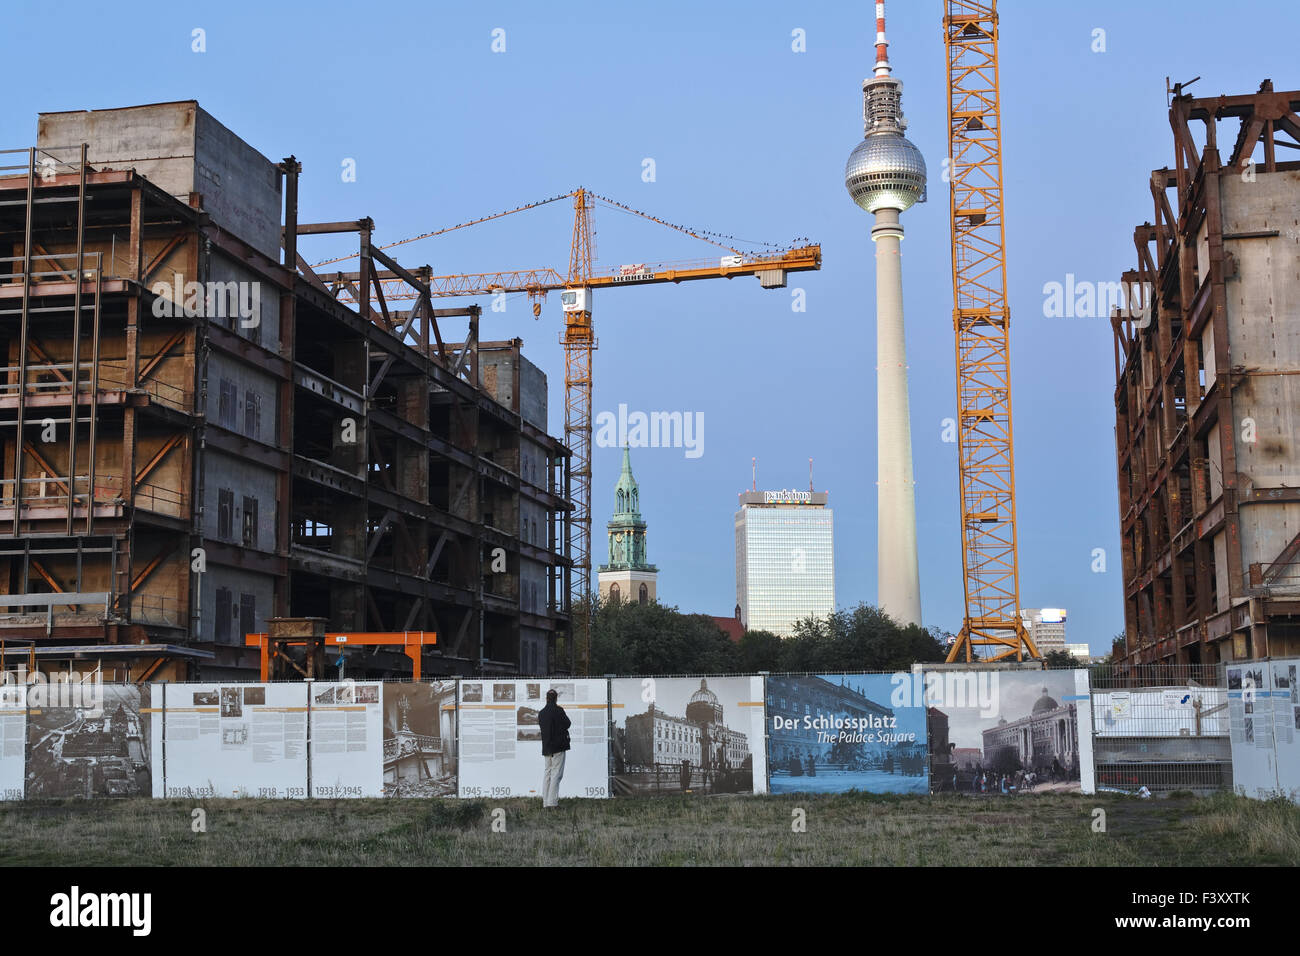 Wrecking of Palace of the Republic, Berlin Stock Photo